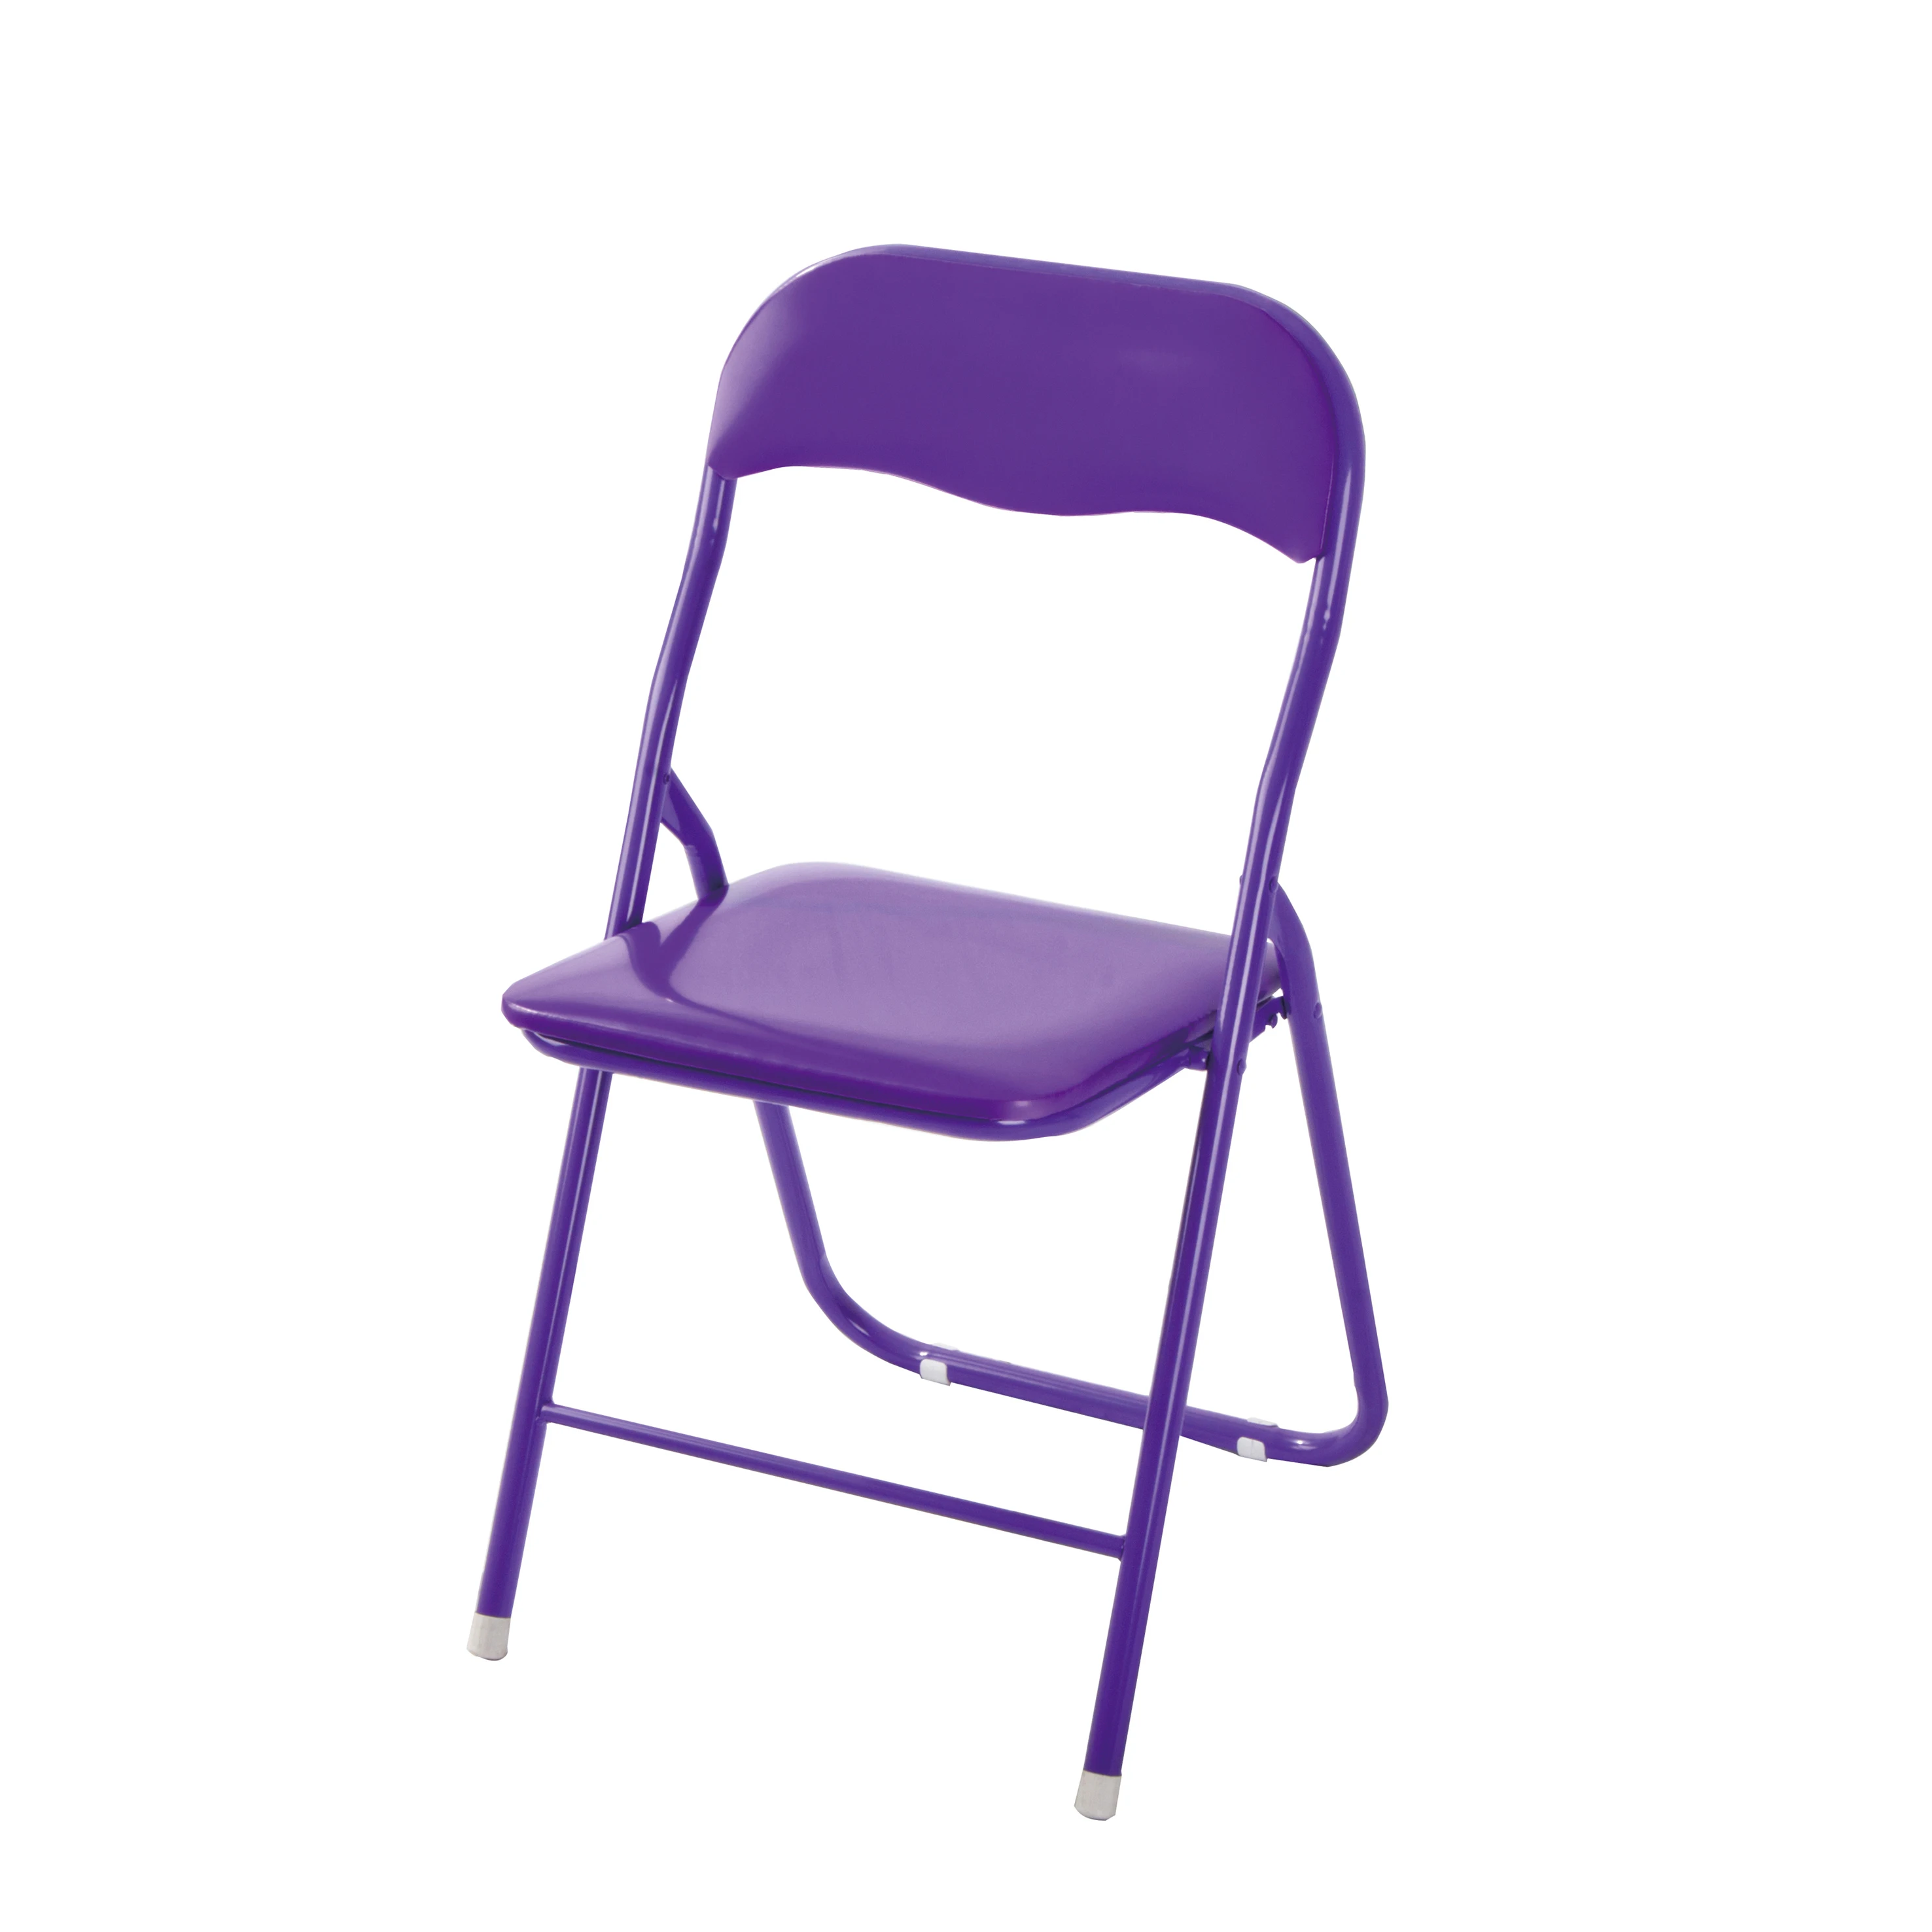 Cheap Metal Folding Chairs With Pvc Seat And Back For Sale Buy